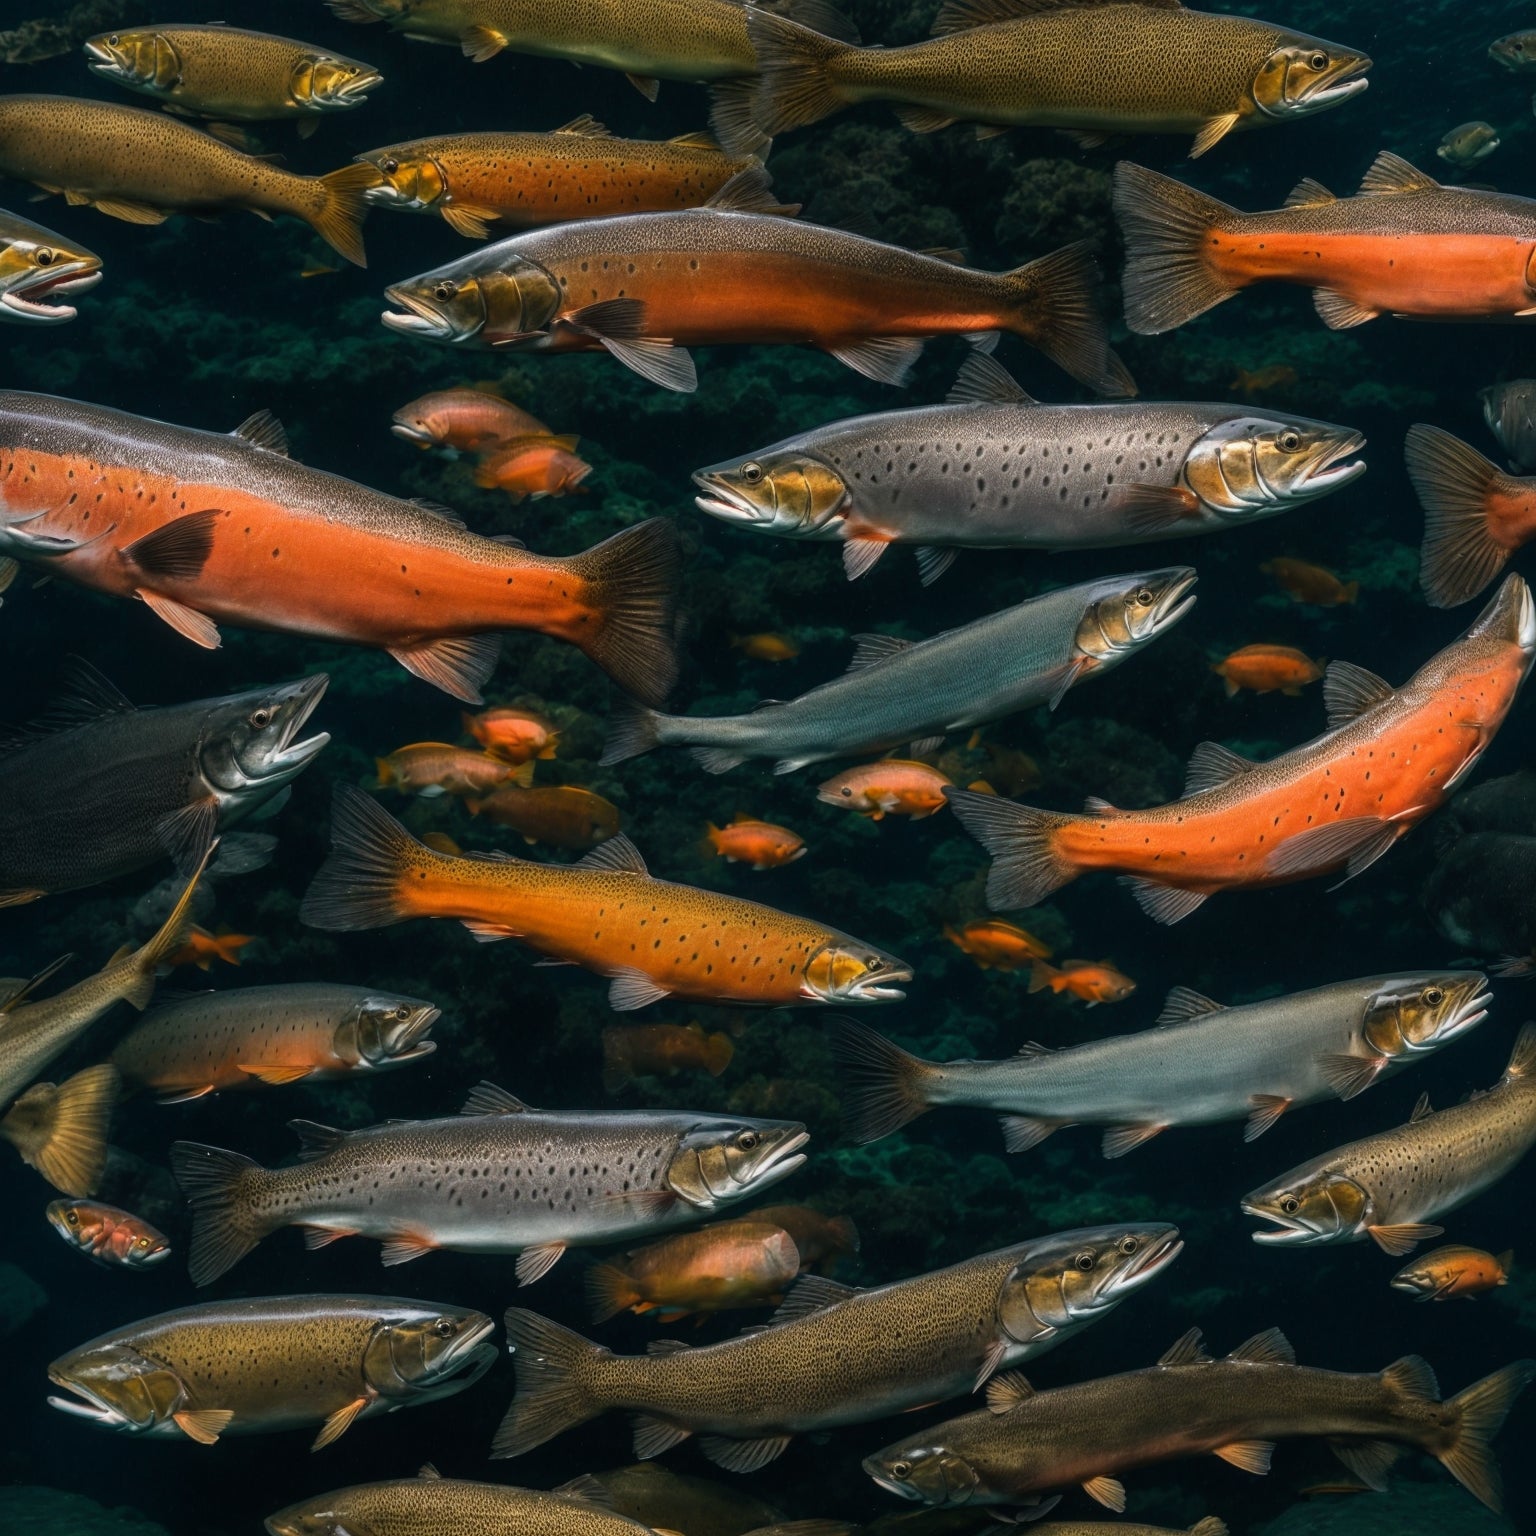 The Atlantic Salmon Life Cycle: From River to Ocean